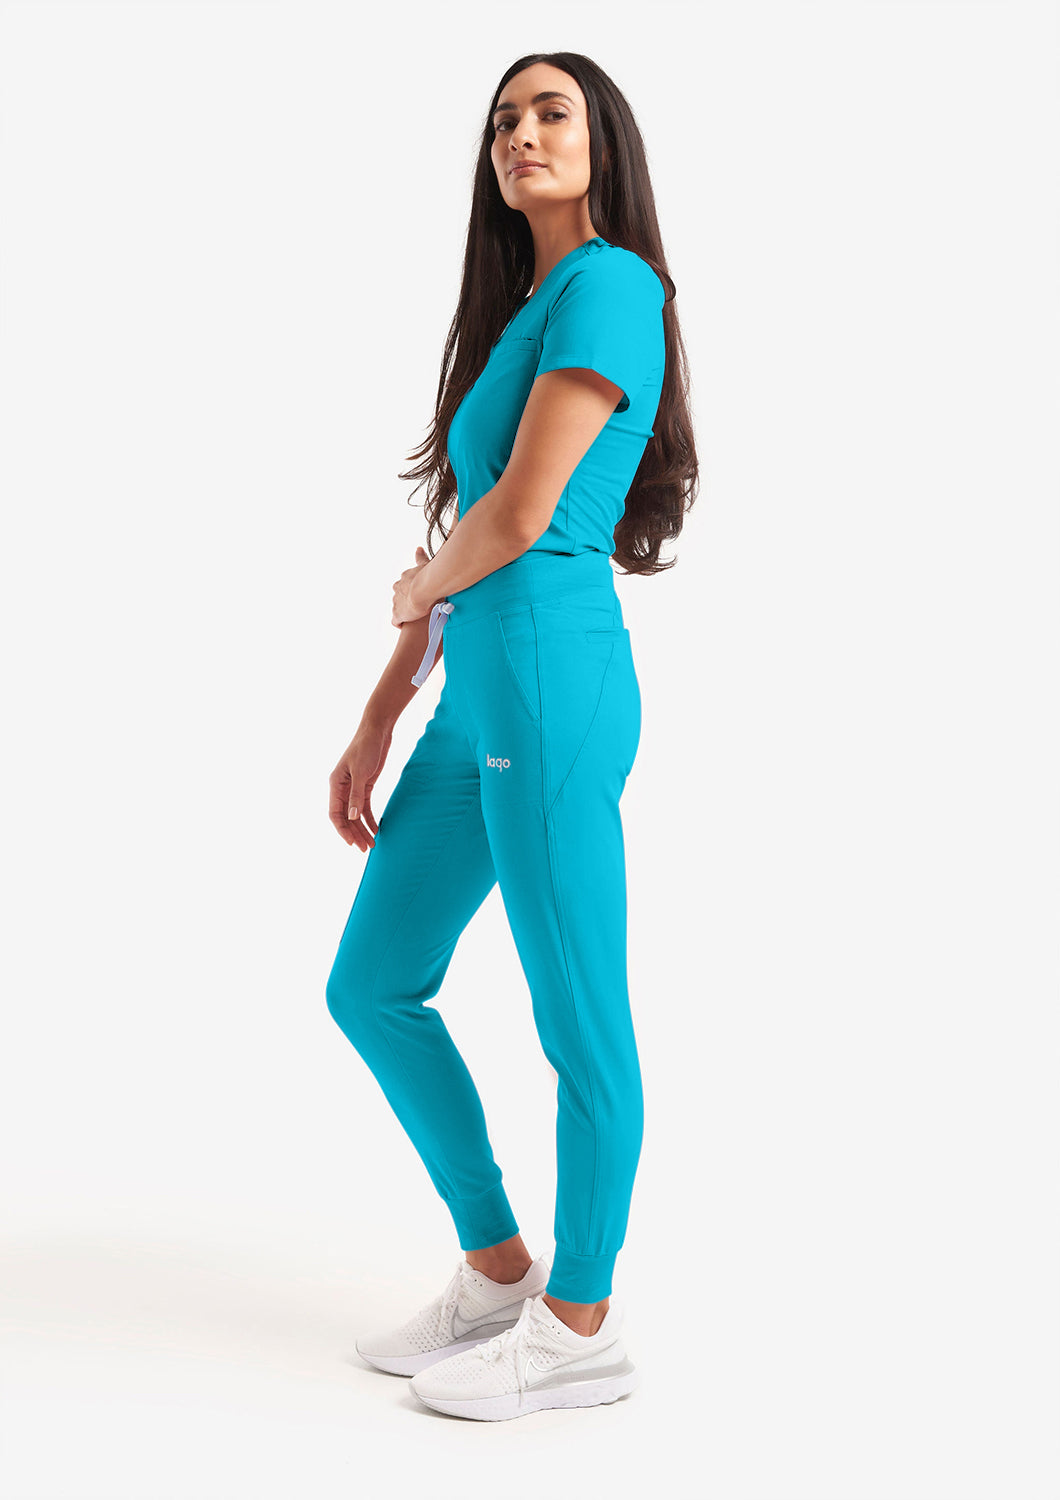 Lango Green Poly Cotton Capris - Buy Lango Green Poly Cotton Capris Online  at Best Prices in India on Snapdeal